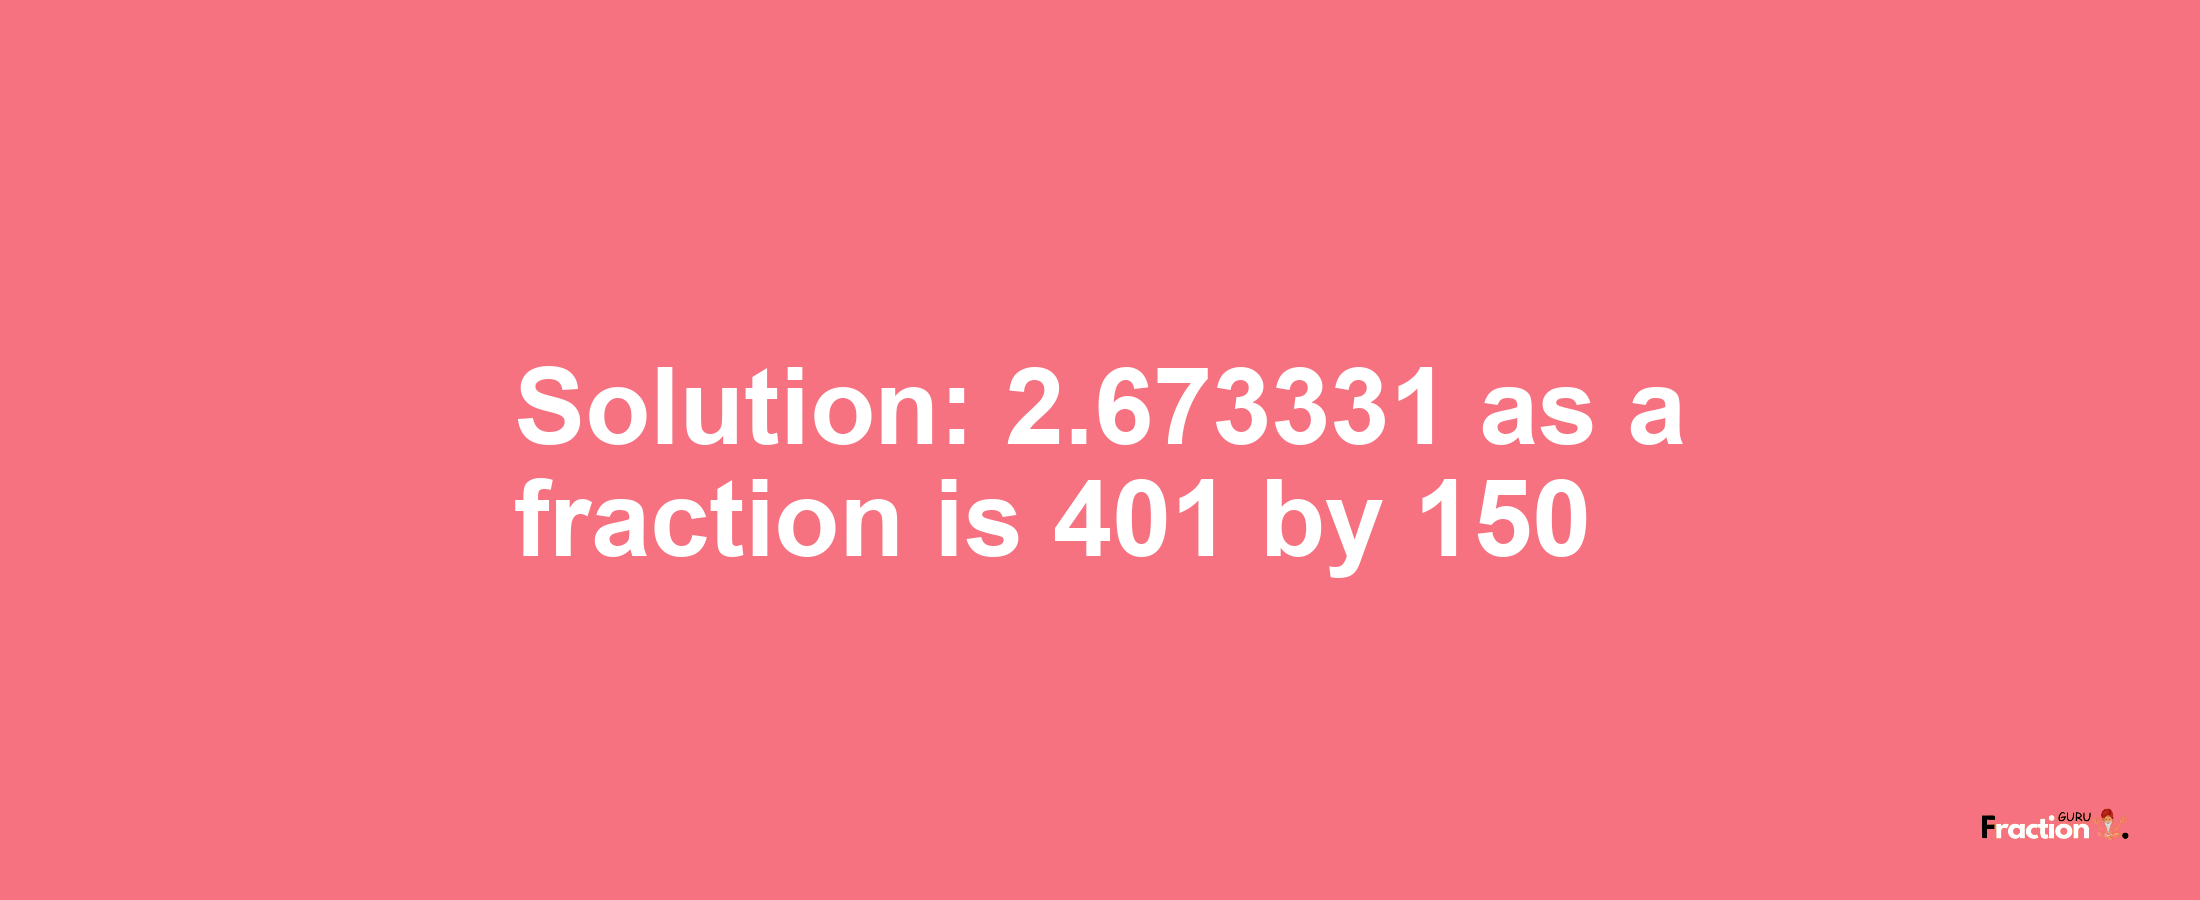 Solution:2.673331 as a fraction is 401/150